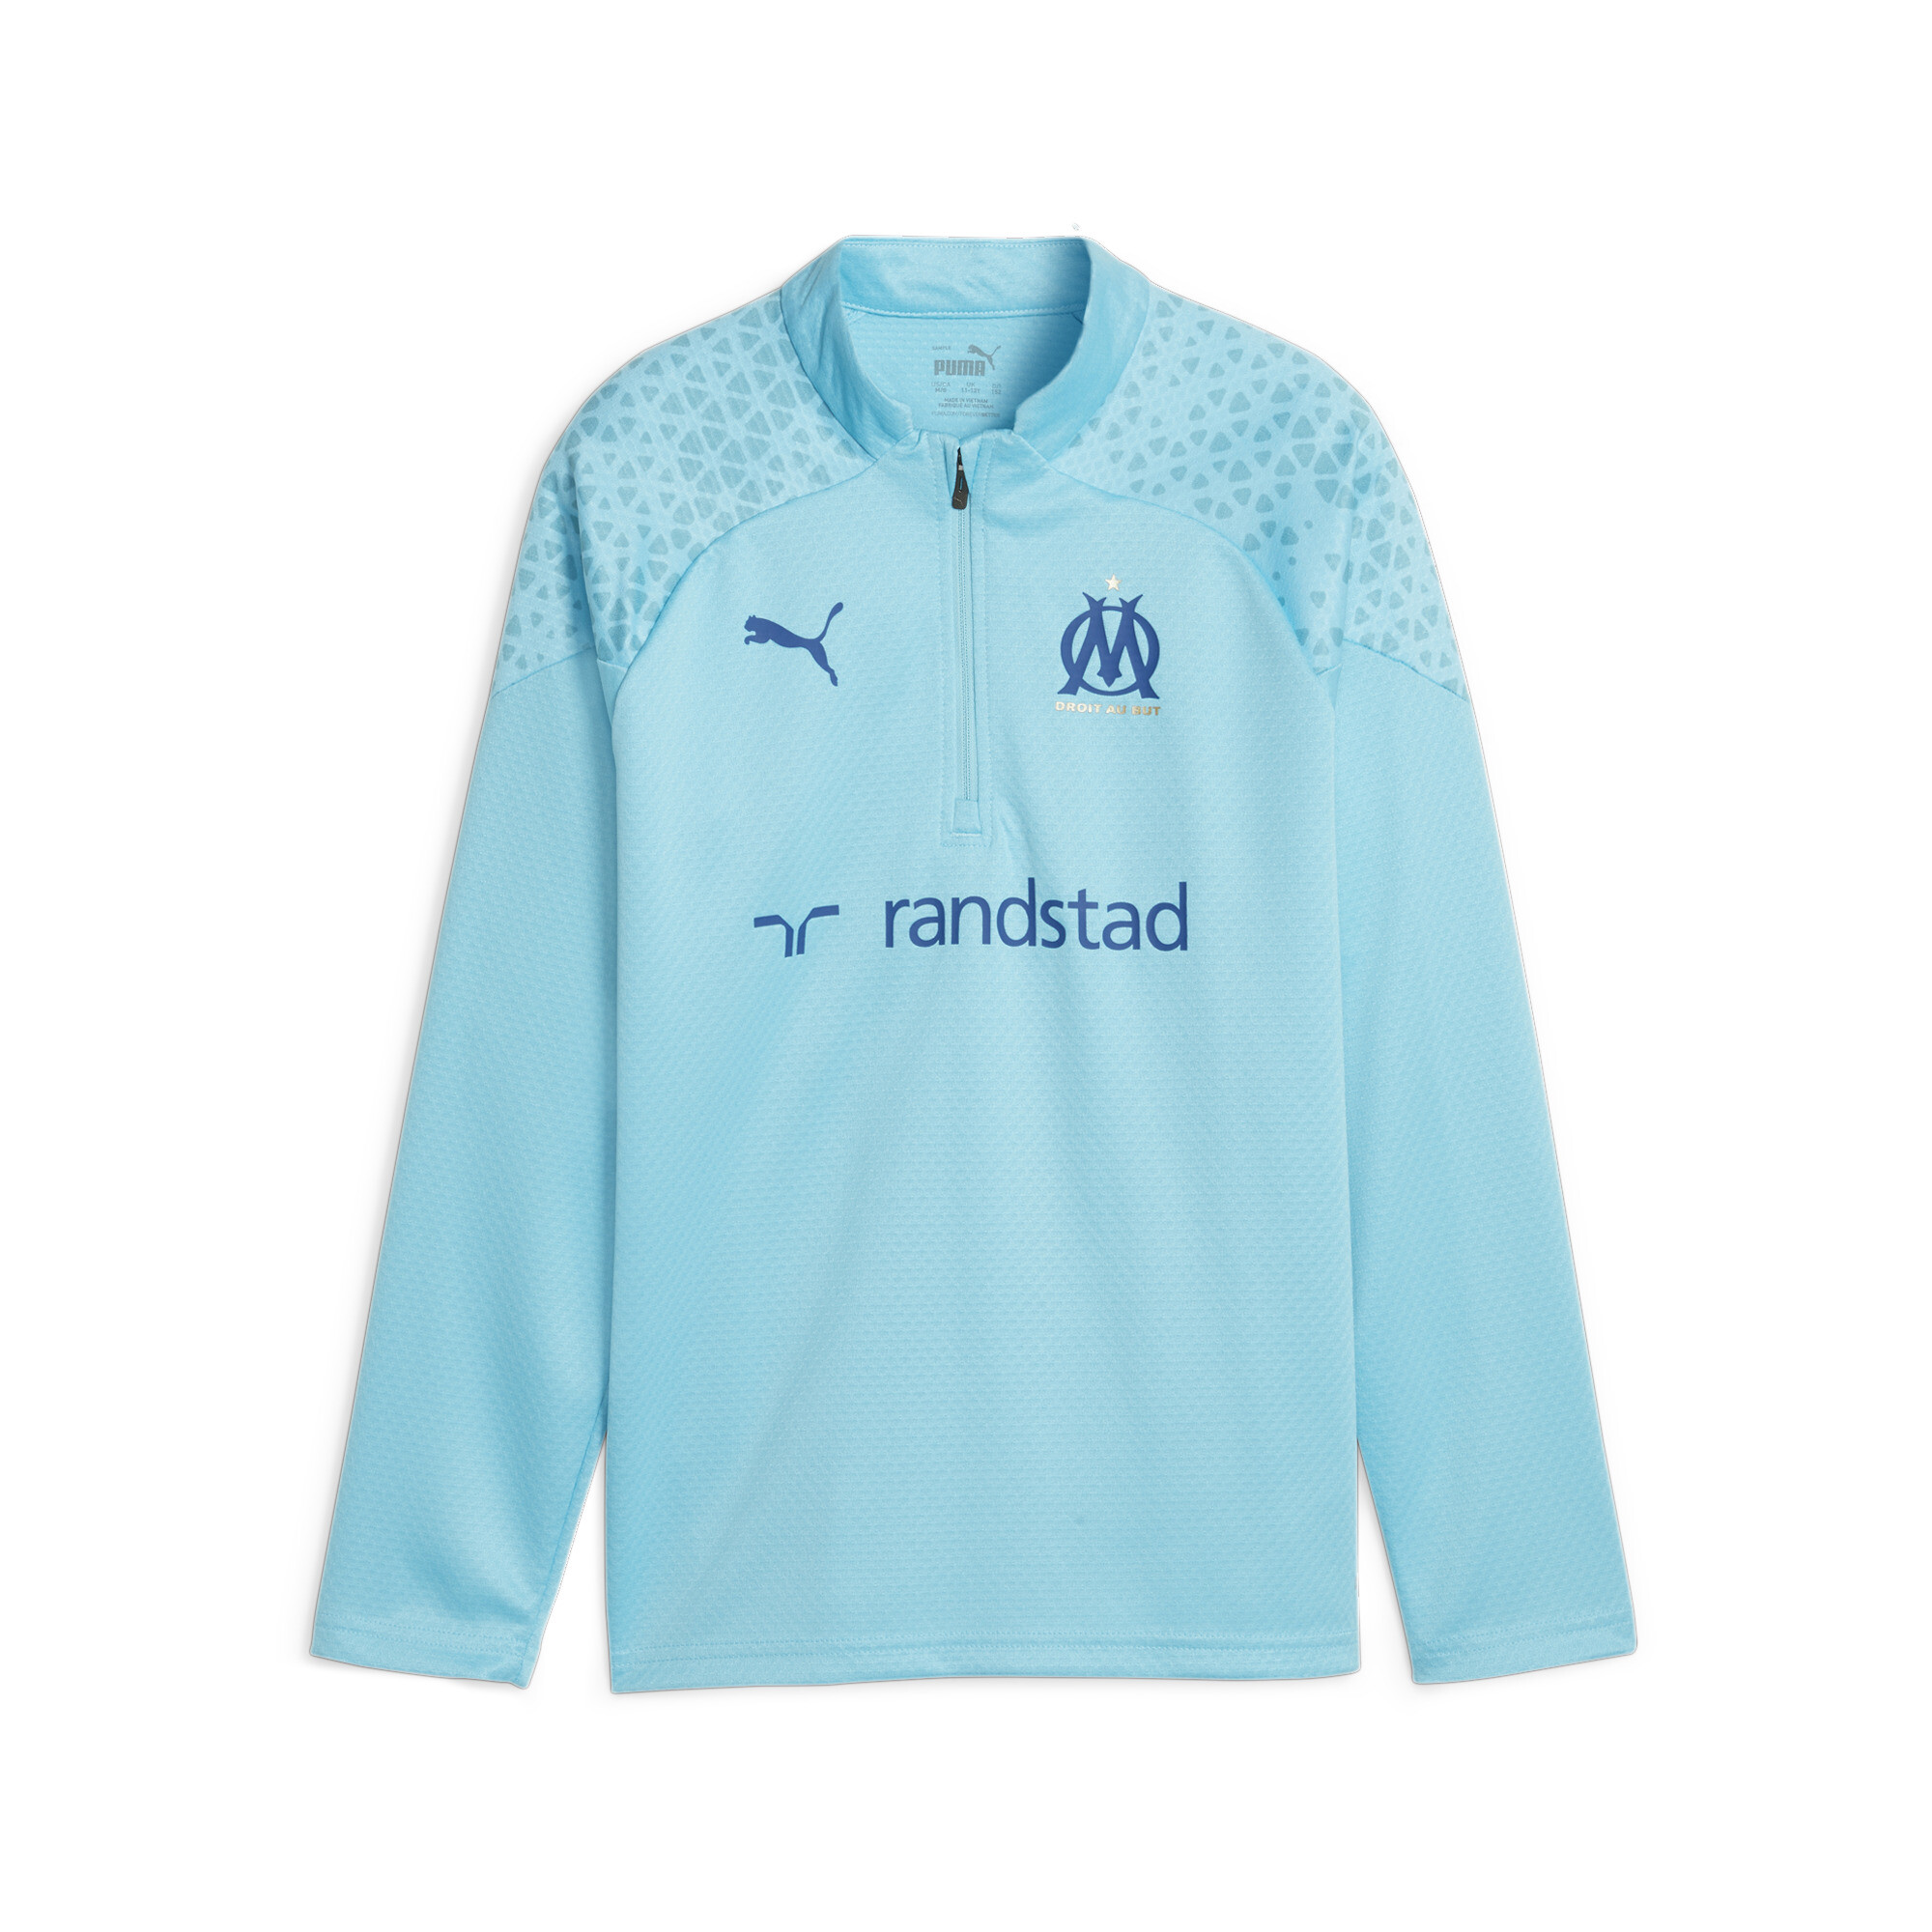 Puma Olympique De Marseille Football Youth Training Quarter-Zip Top, Blue Top, Size 5-6Y Top, Clothing